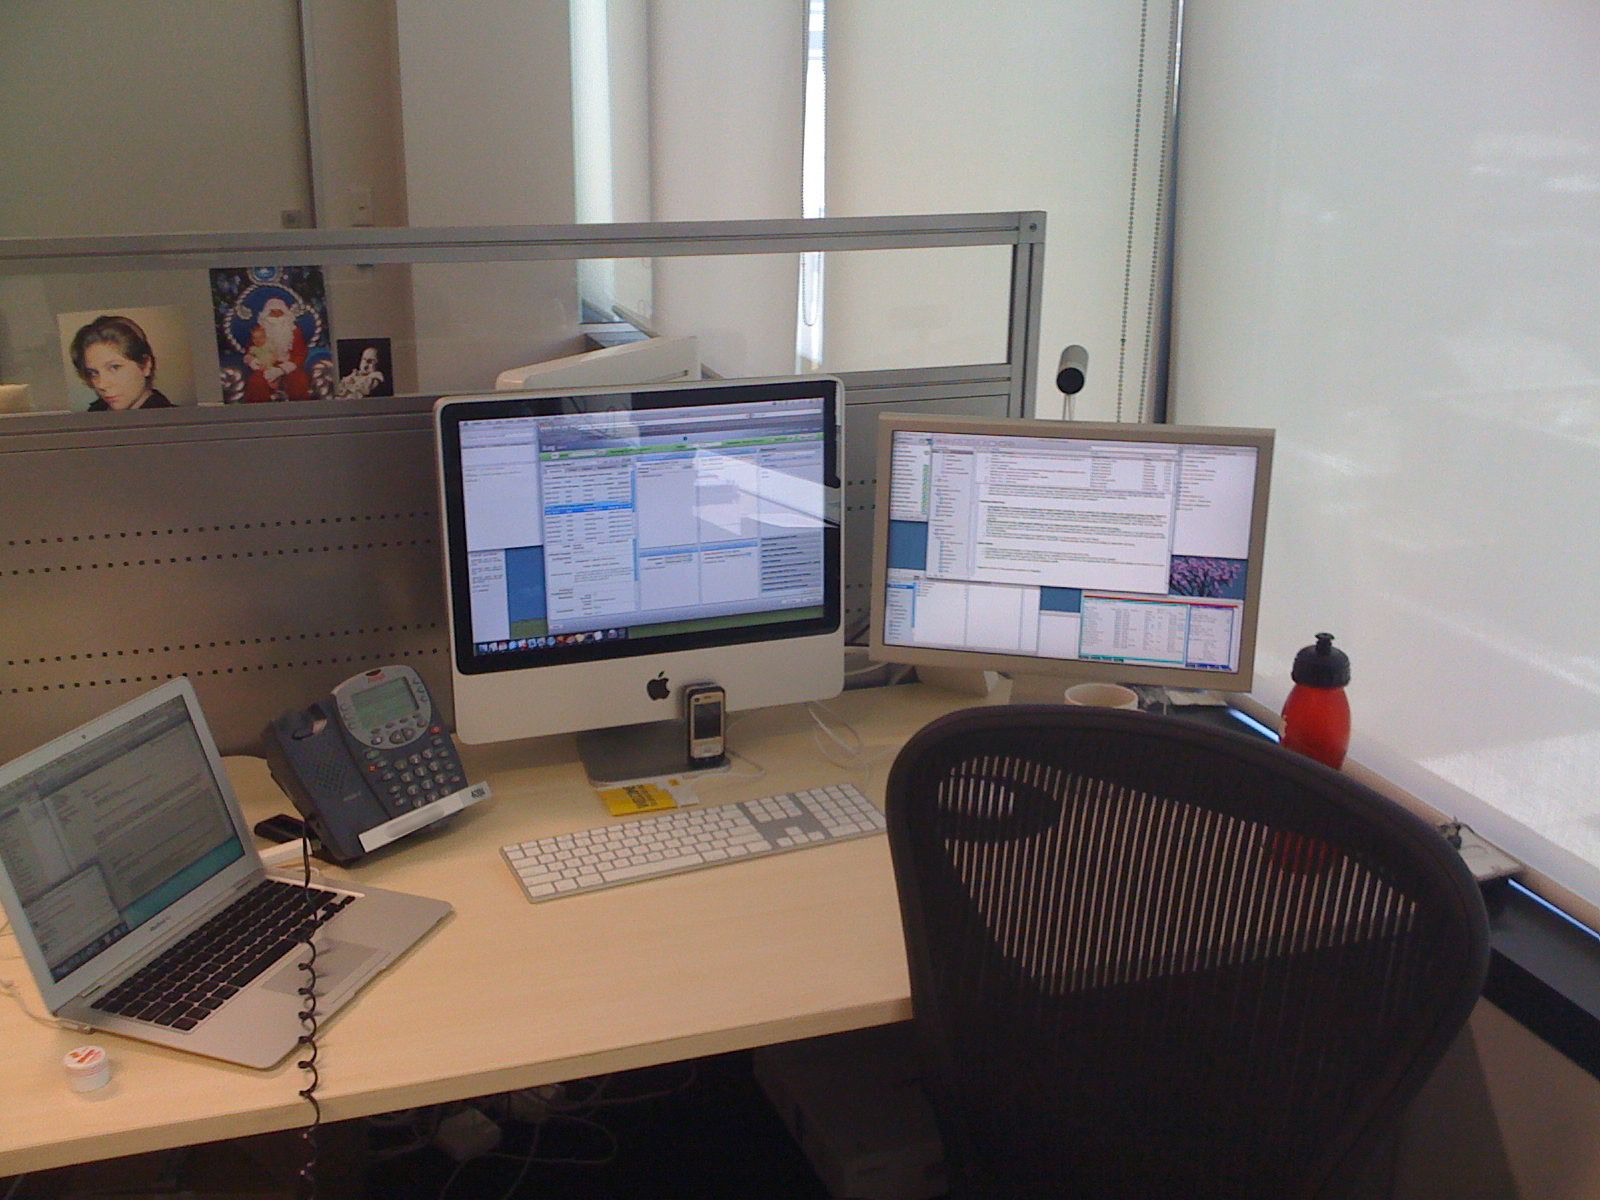 A photo of my work desk setup. The iMac is in the middle, Cinema Display to the right, and MacBook Air to the left, with a call centre desk phone sitting between the iMac and the MacBook Air.